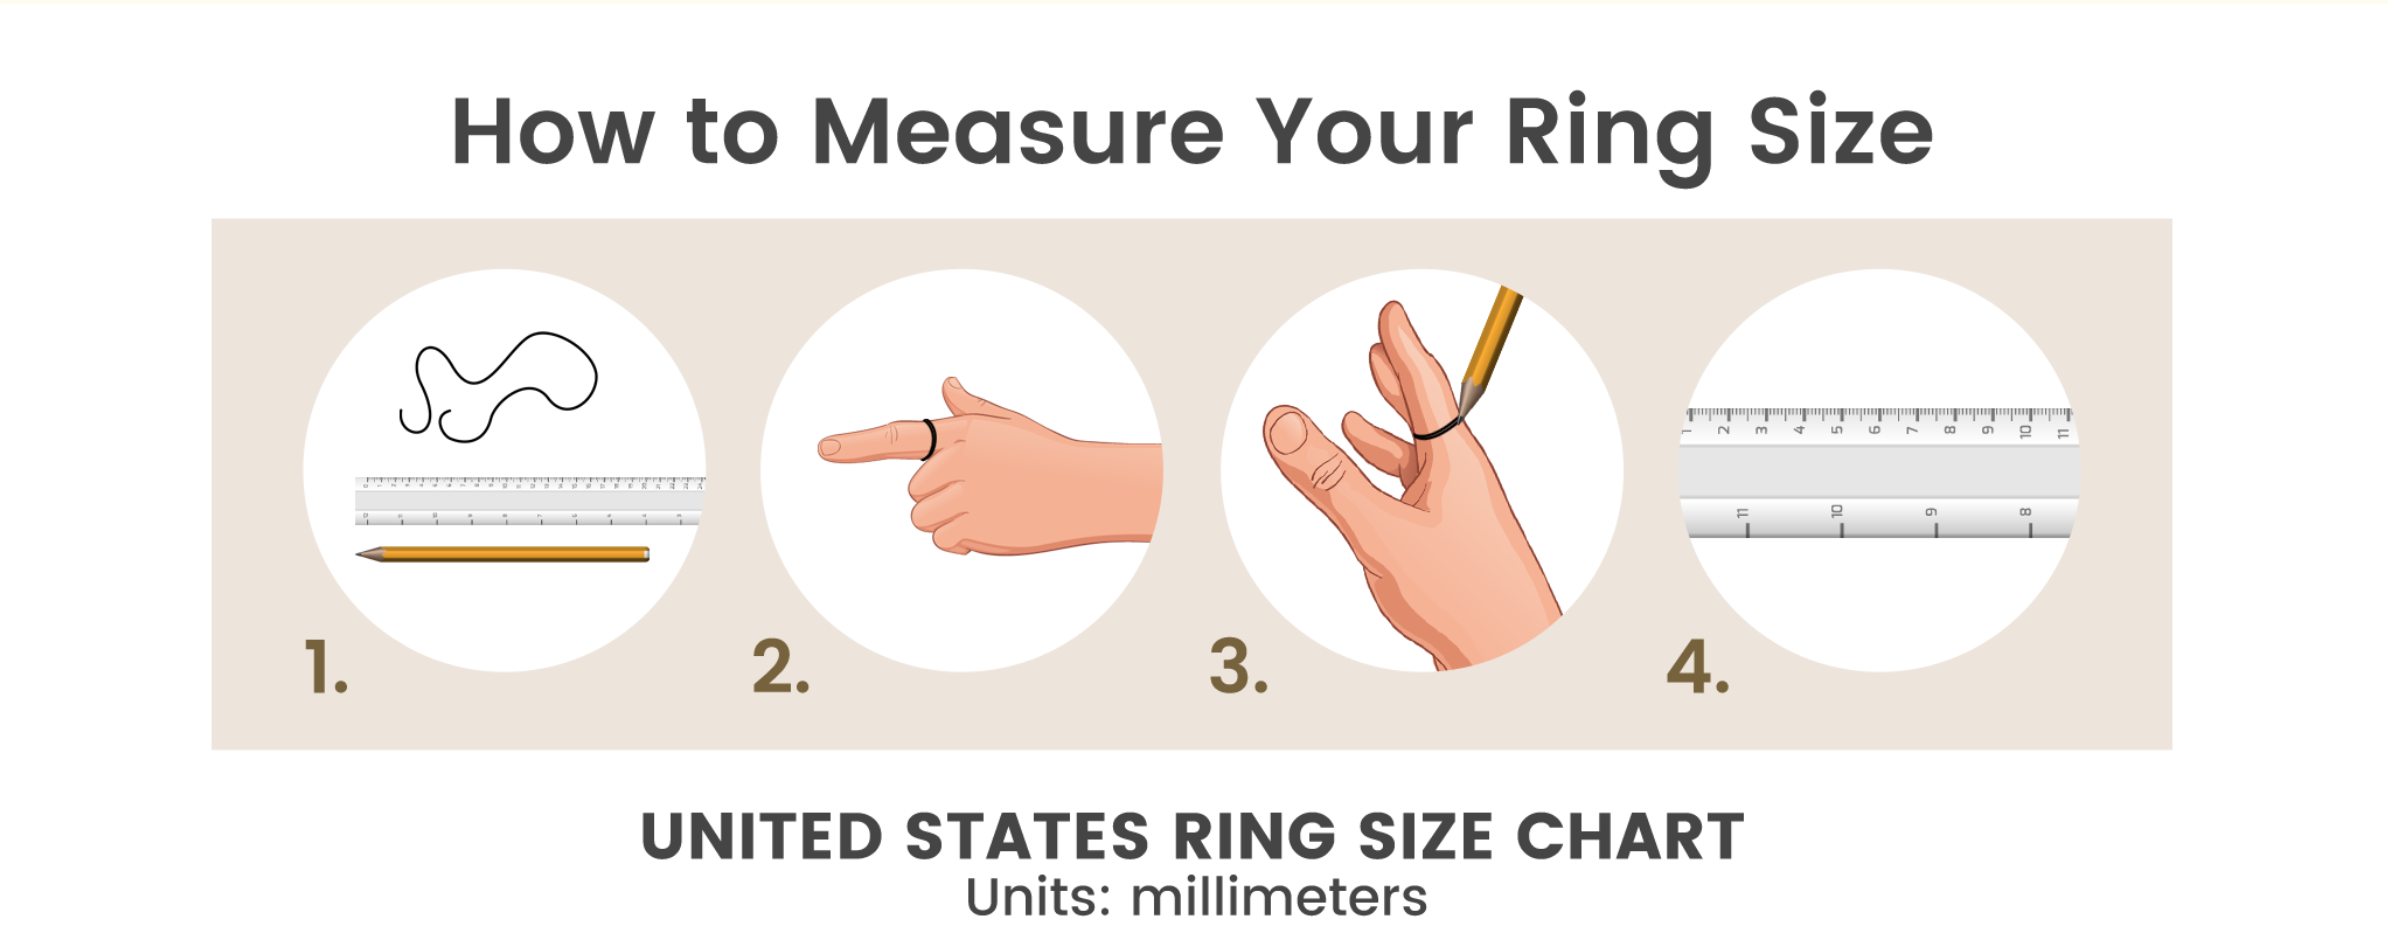 Home Ring Sizing Guide: Find Your Fit